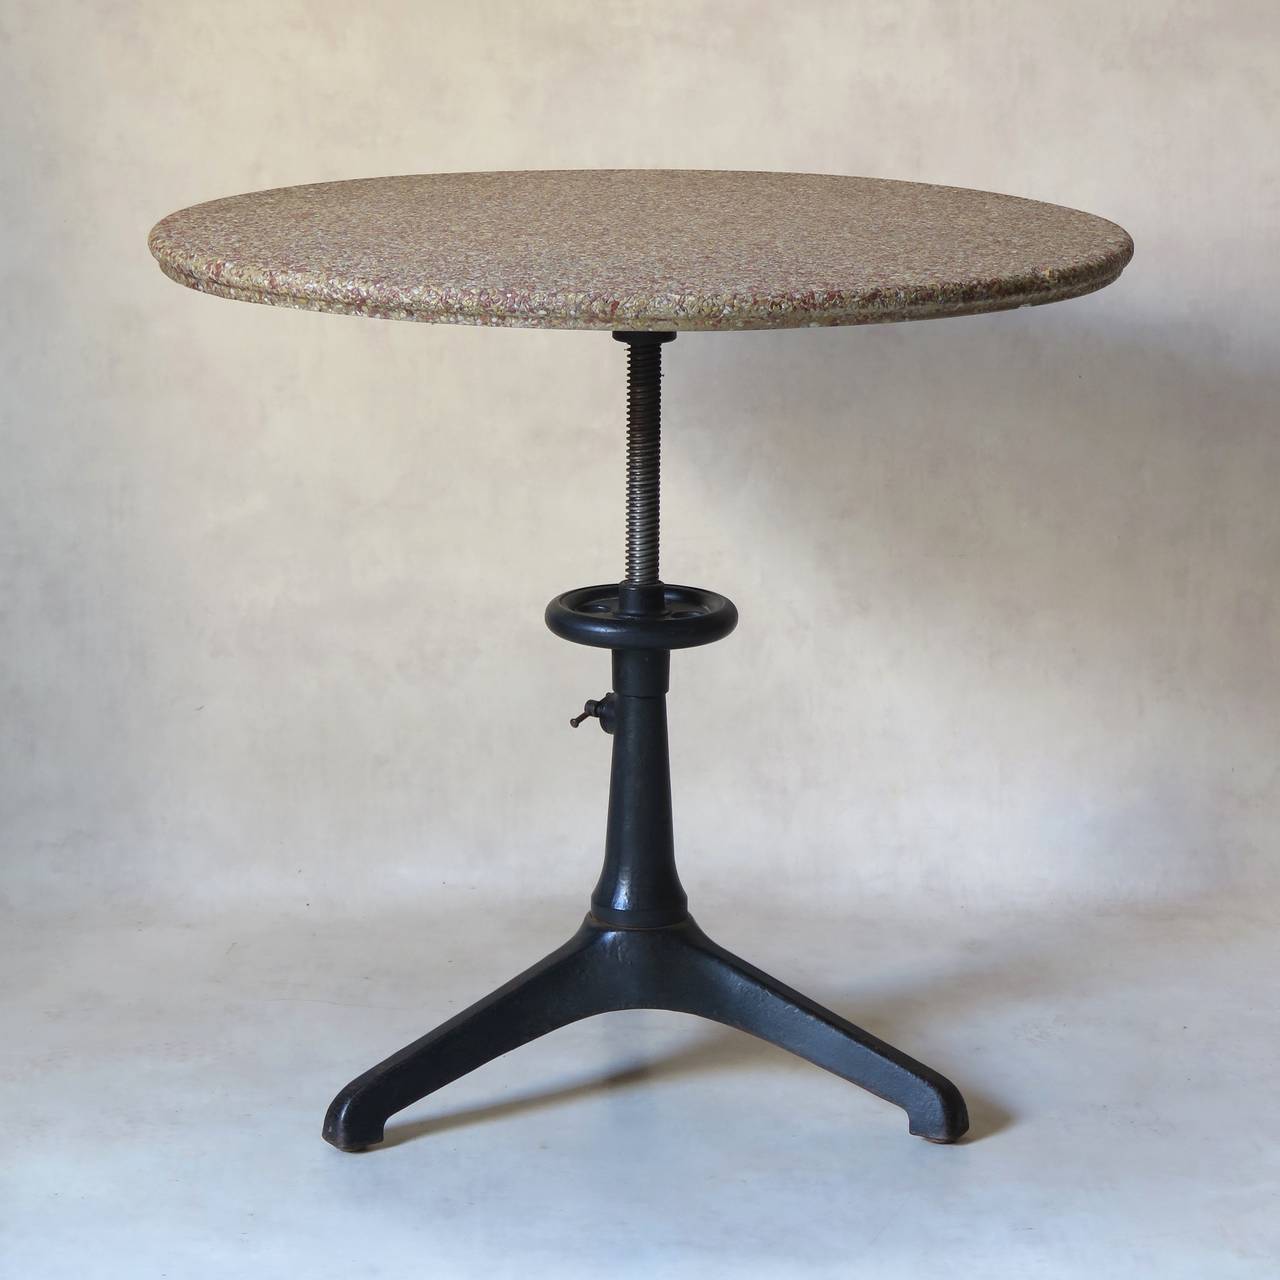 Nicely designed cast iron Industrial tripod table. The height is adjustable. Round pinky-grey terrazzo table top.

Dimensions provided below correspond to the lowest table height possible. Fully extended, the height is 83 centimeters (32.67